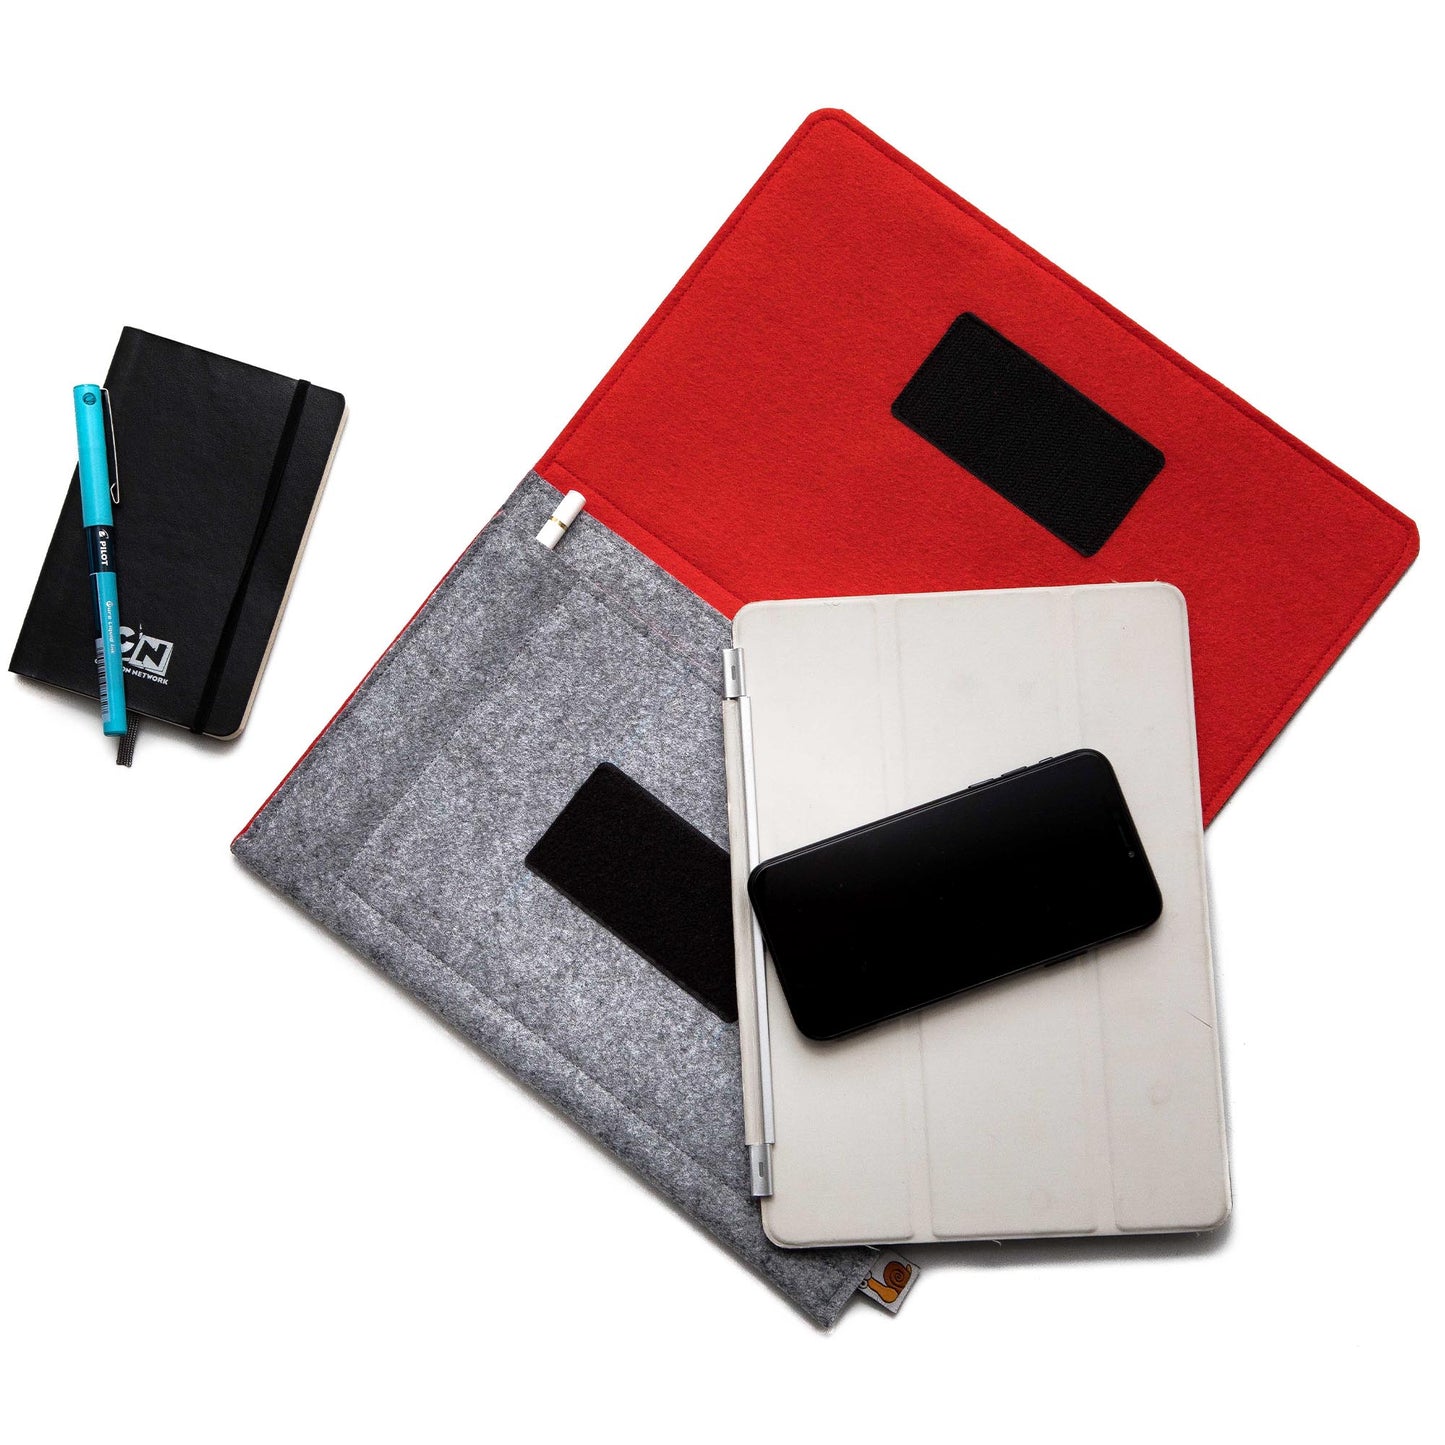 Premium Felt iPad Cover: Ultimate Protection with Accessories Pocket - Grey & Red